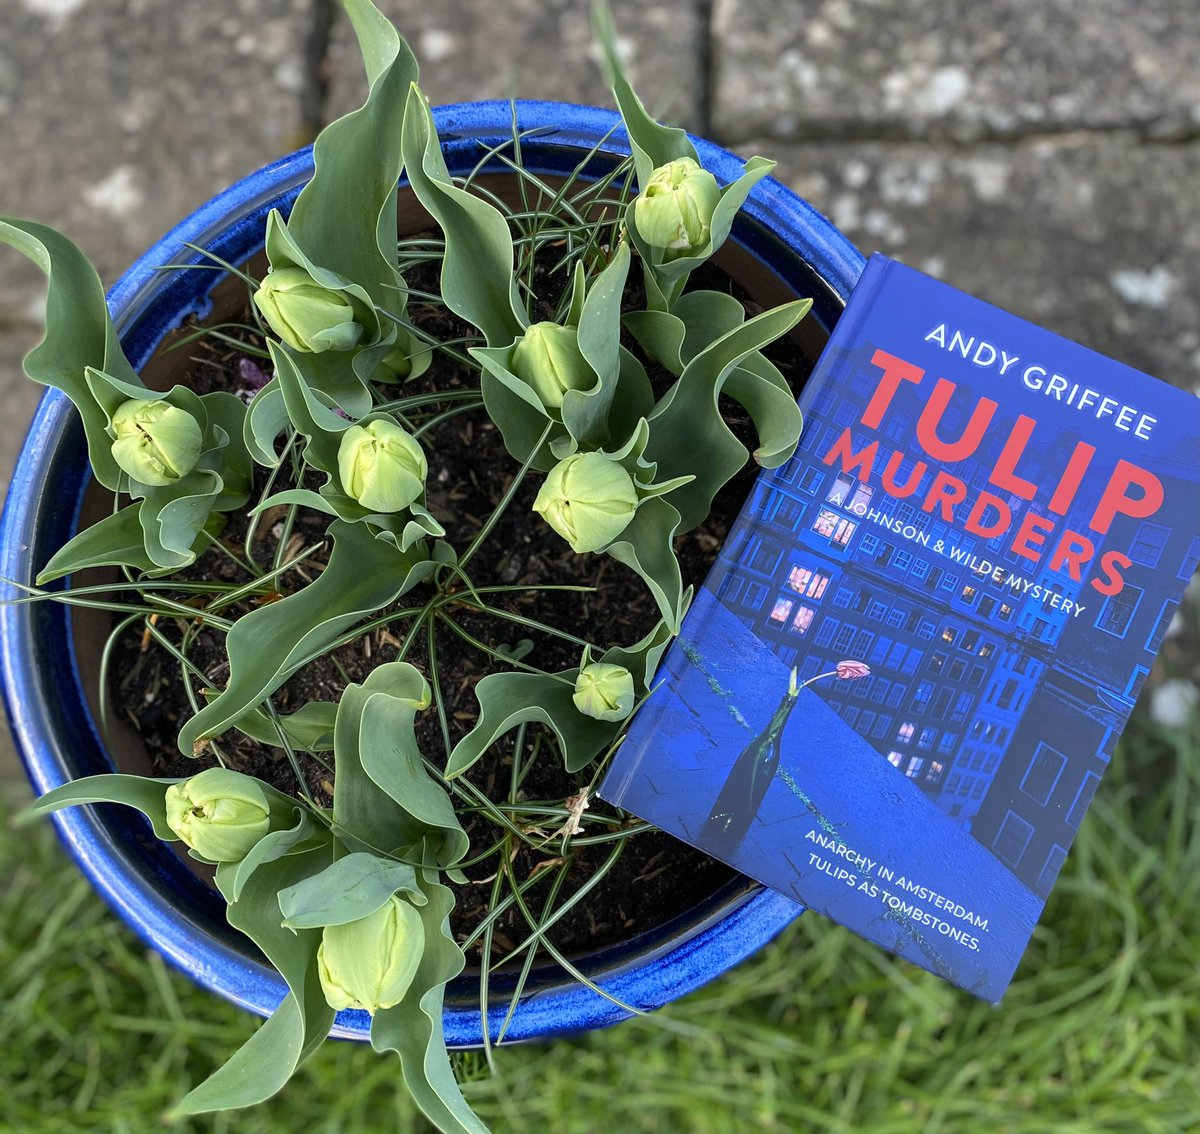 Can’t believe it. The #Amsterdam Tourist Board has demanded the withdrawal of my new book #TulipMurders because it gives the ‘wrong impression’ of their city and ‘denigrates our national flower’. Please ❤️ if you’ll support me. #CrimeFiction #Amazon #canals #johnsonandwilde